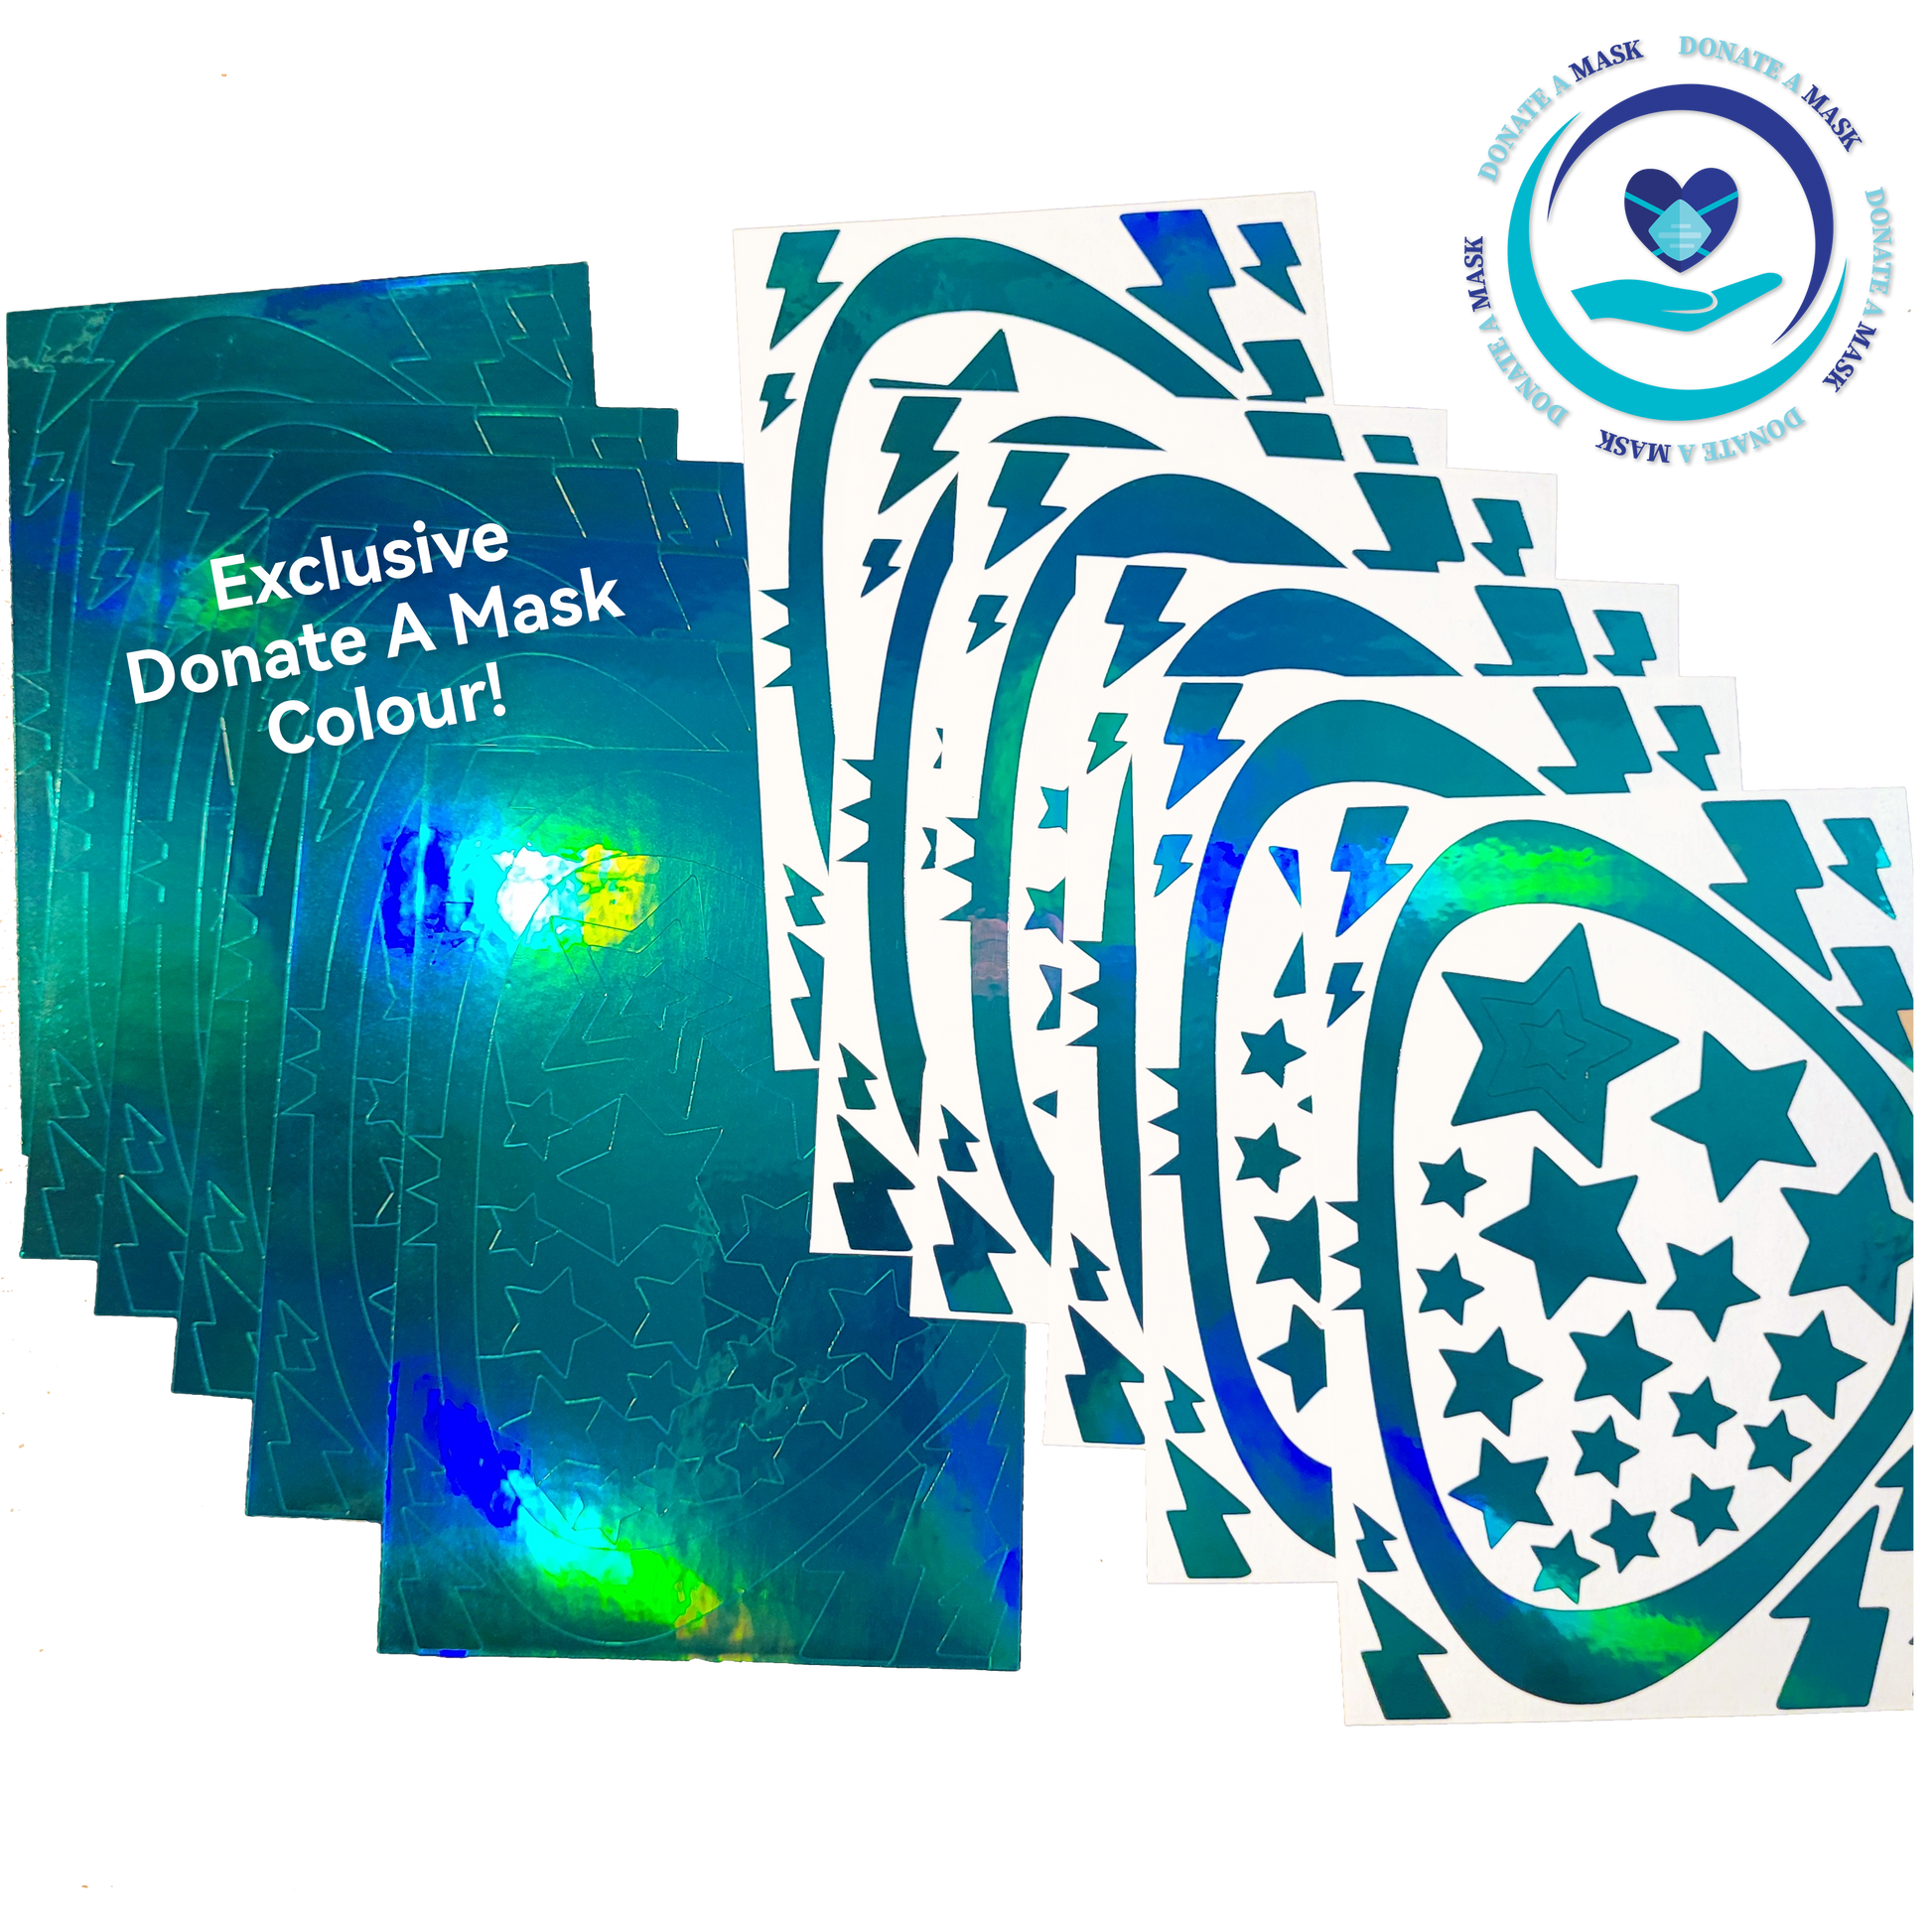 Picture of turquoise decals with a Donate Mask logo in the top right; Wording in the left side: "Exclusive Donate A Mask Colour!"